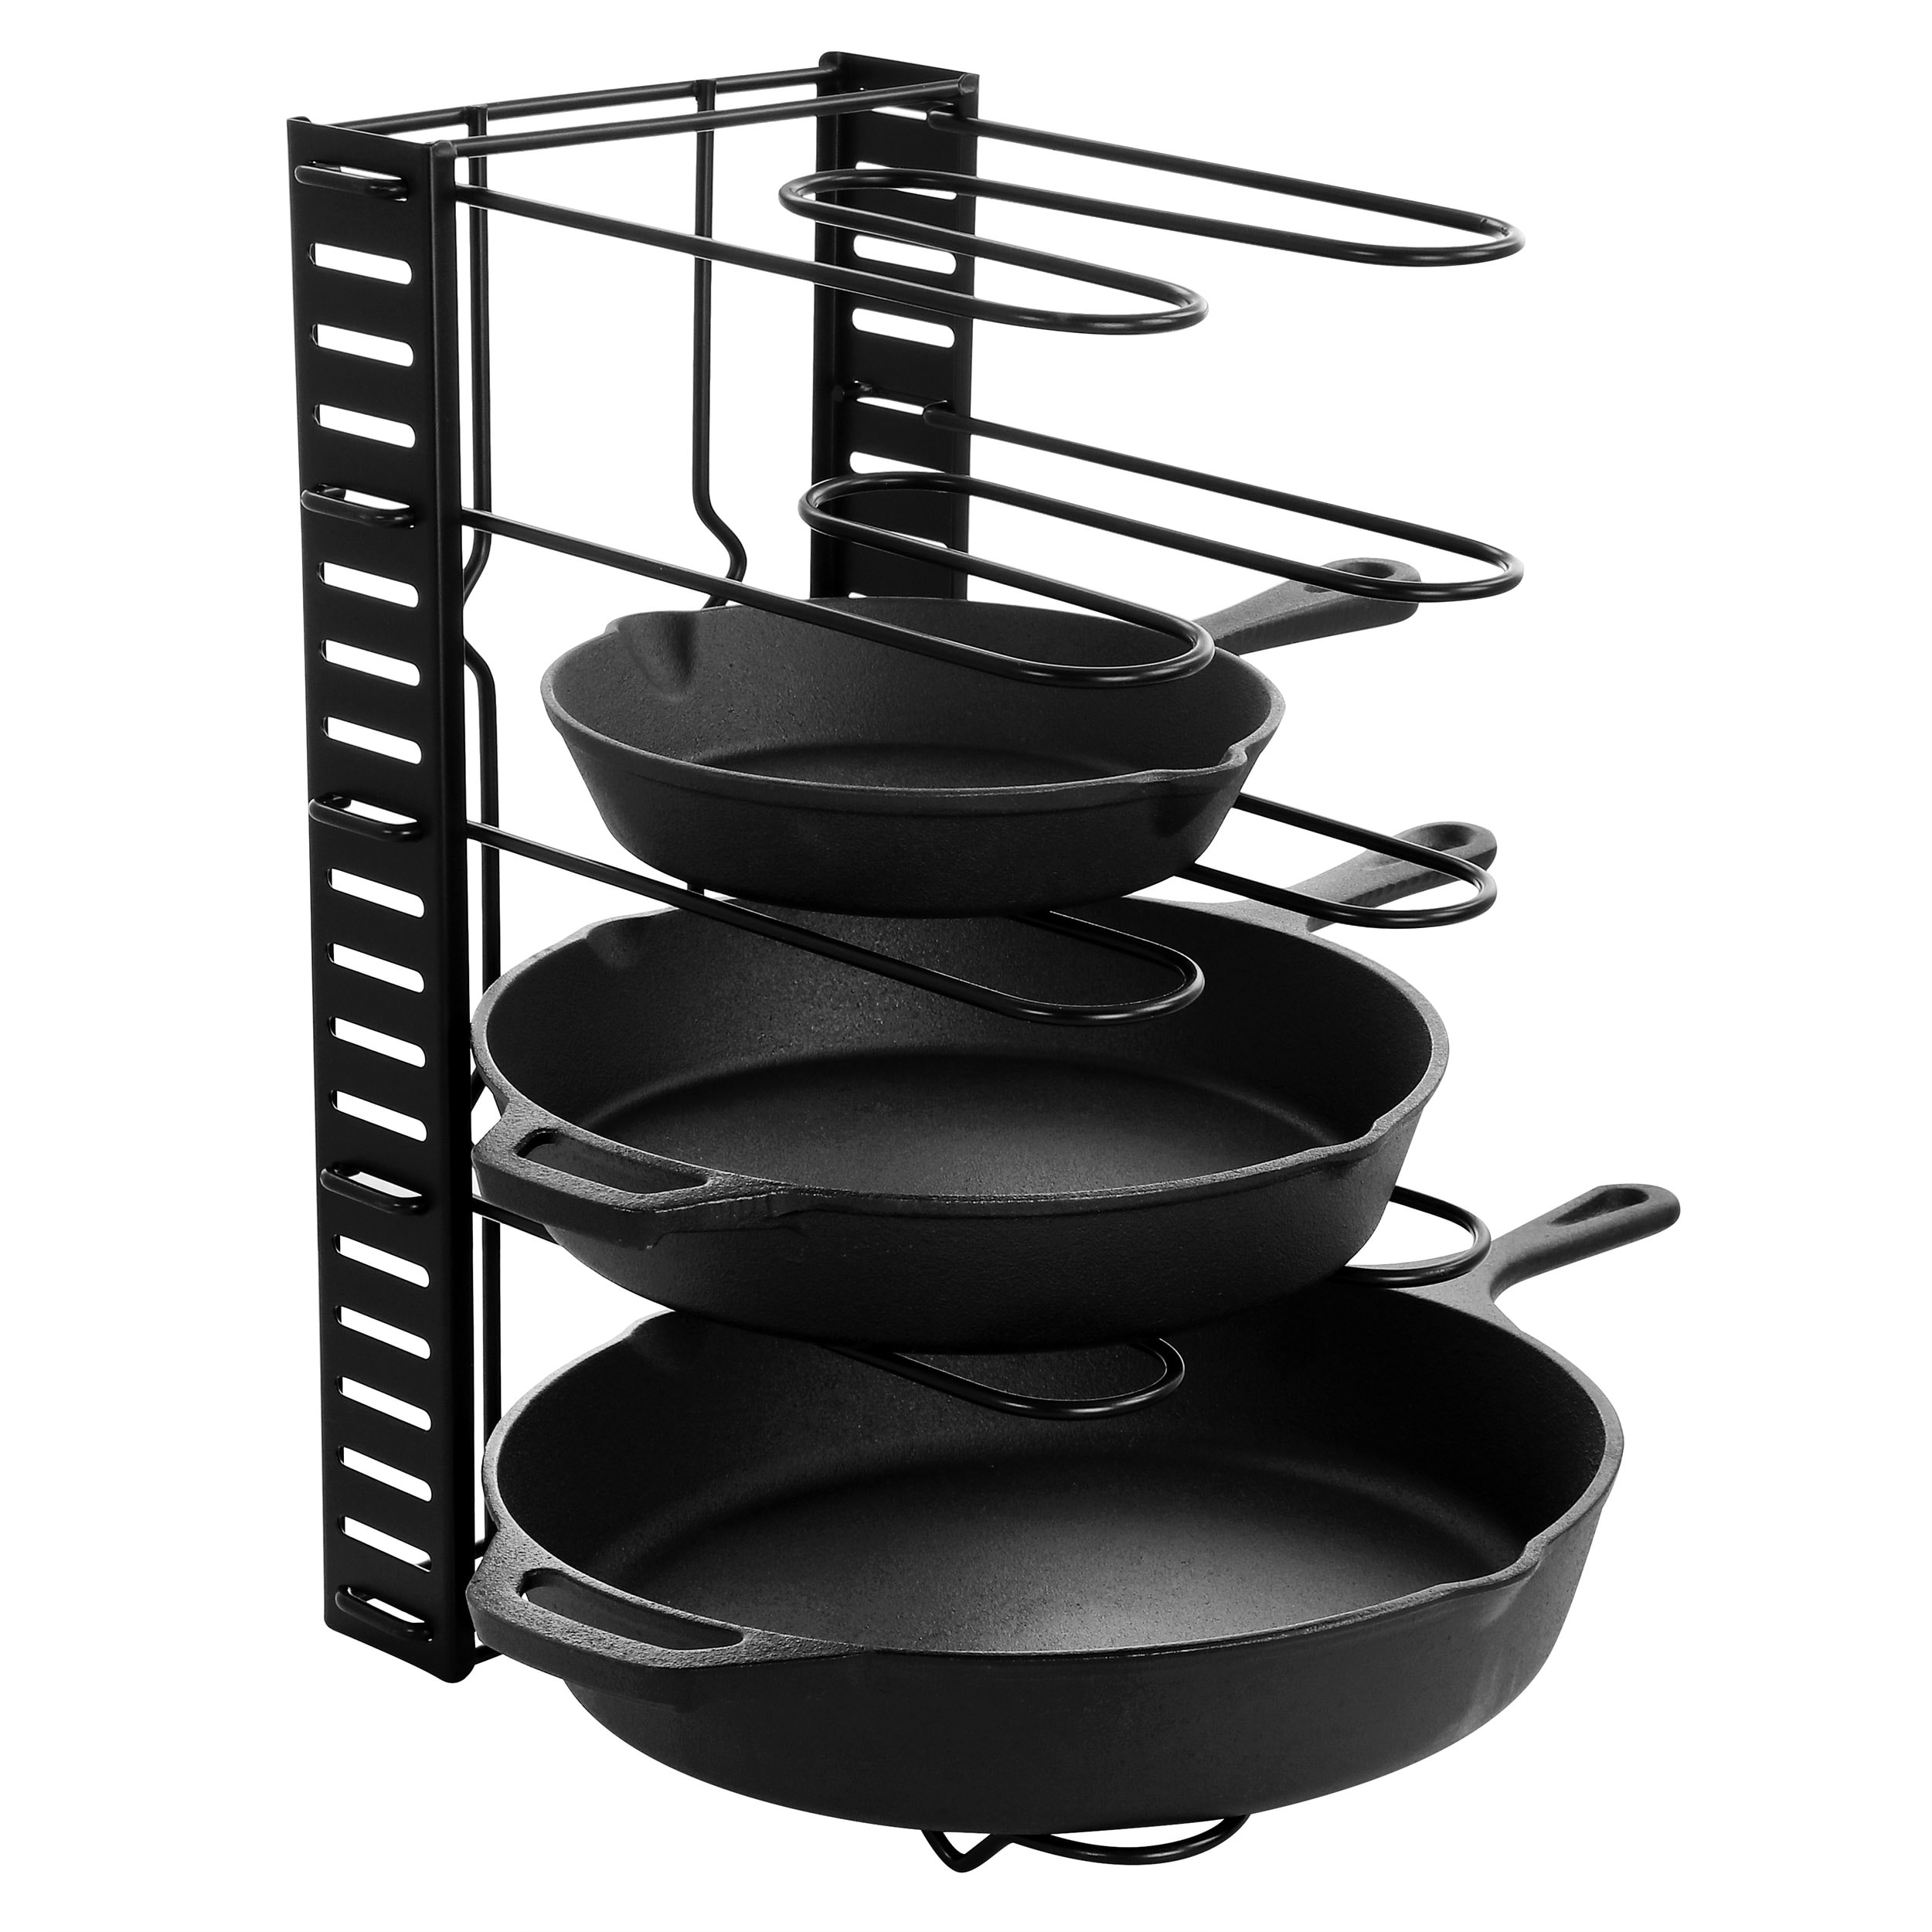 https://ak1.ostkcdn.com/images/products/is/images/direct/c1a66cbdfe3687aa29f74cca21ff655fbd86a167/Cast-Iron-Pre-Seasoned-Skillet-and-Accessories-12-Piece-Set.jpg